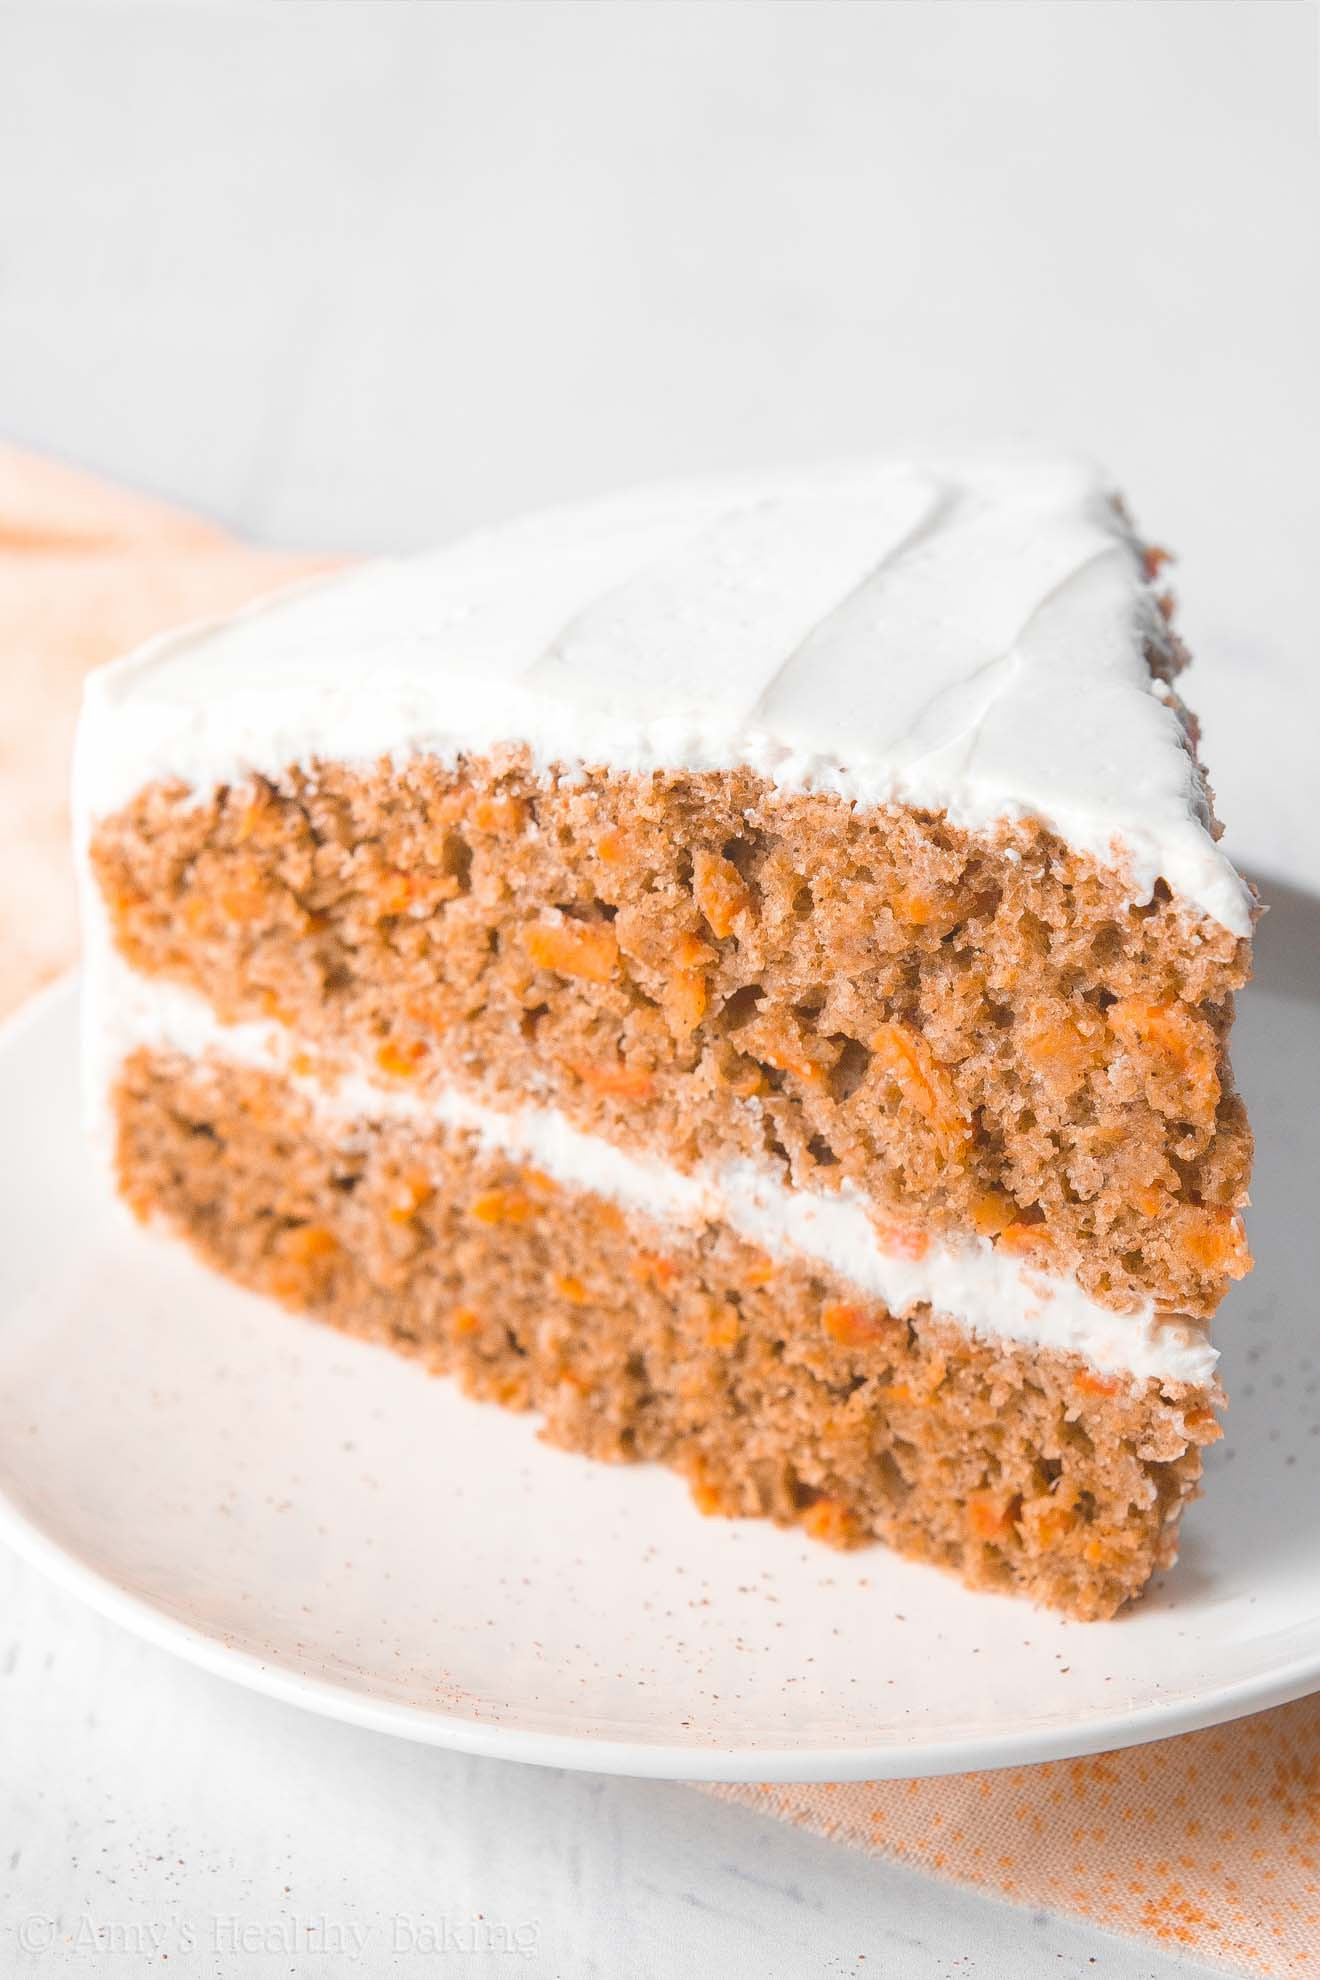 Low Calorie Carrot Cake Recipe
 The Ultimate Healthy Carrot Cake With a Step by Step